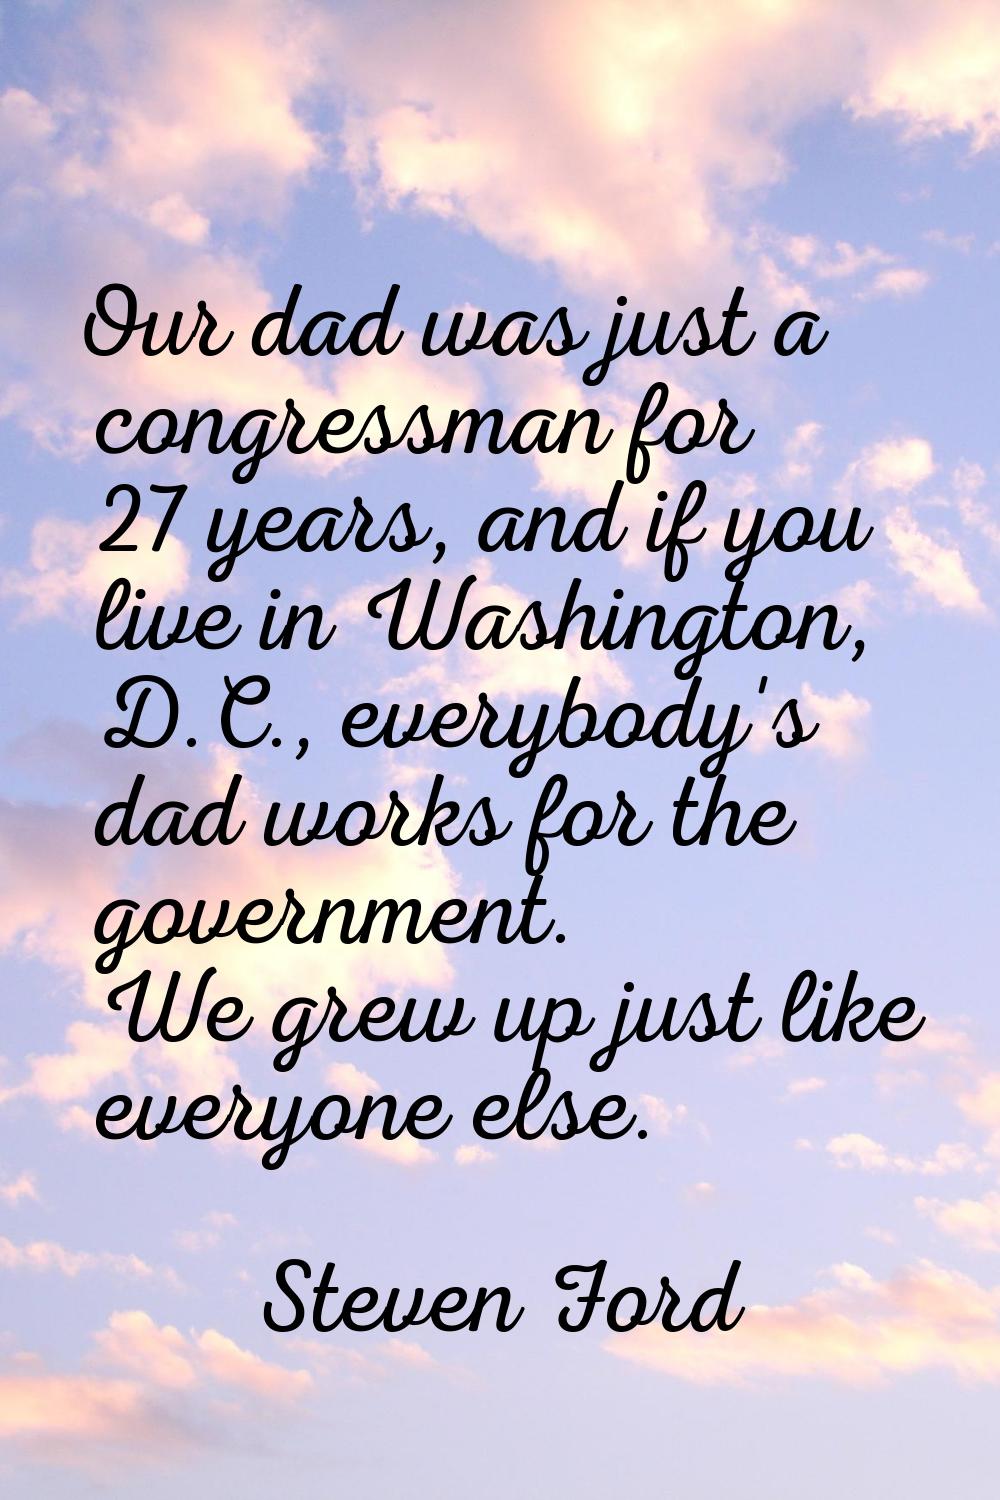 Our dad was just a congressman for 27 years, and if you live in Washington, D.C., everybody's dad w